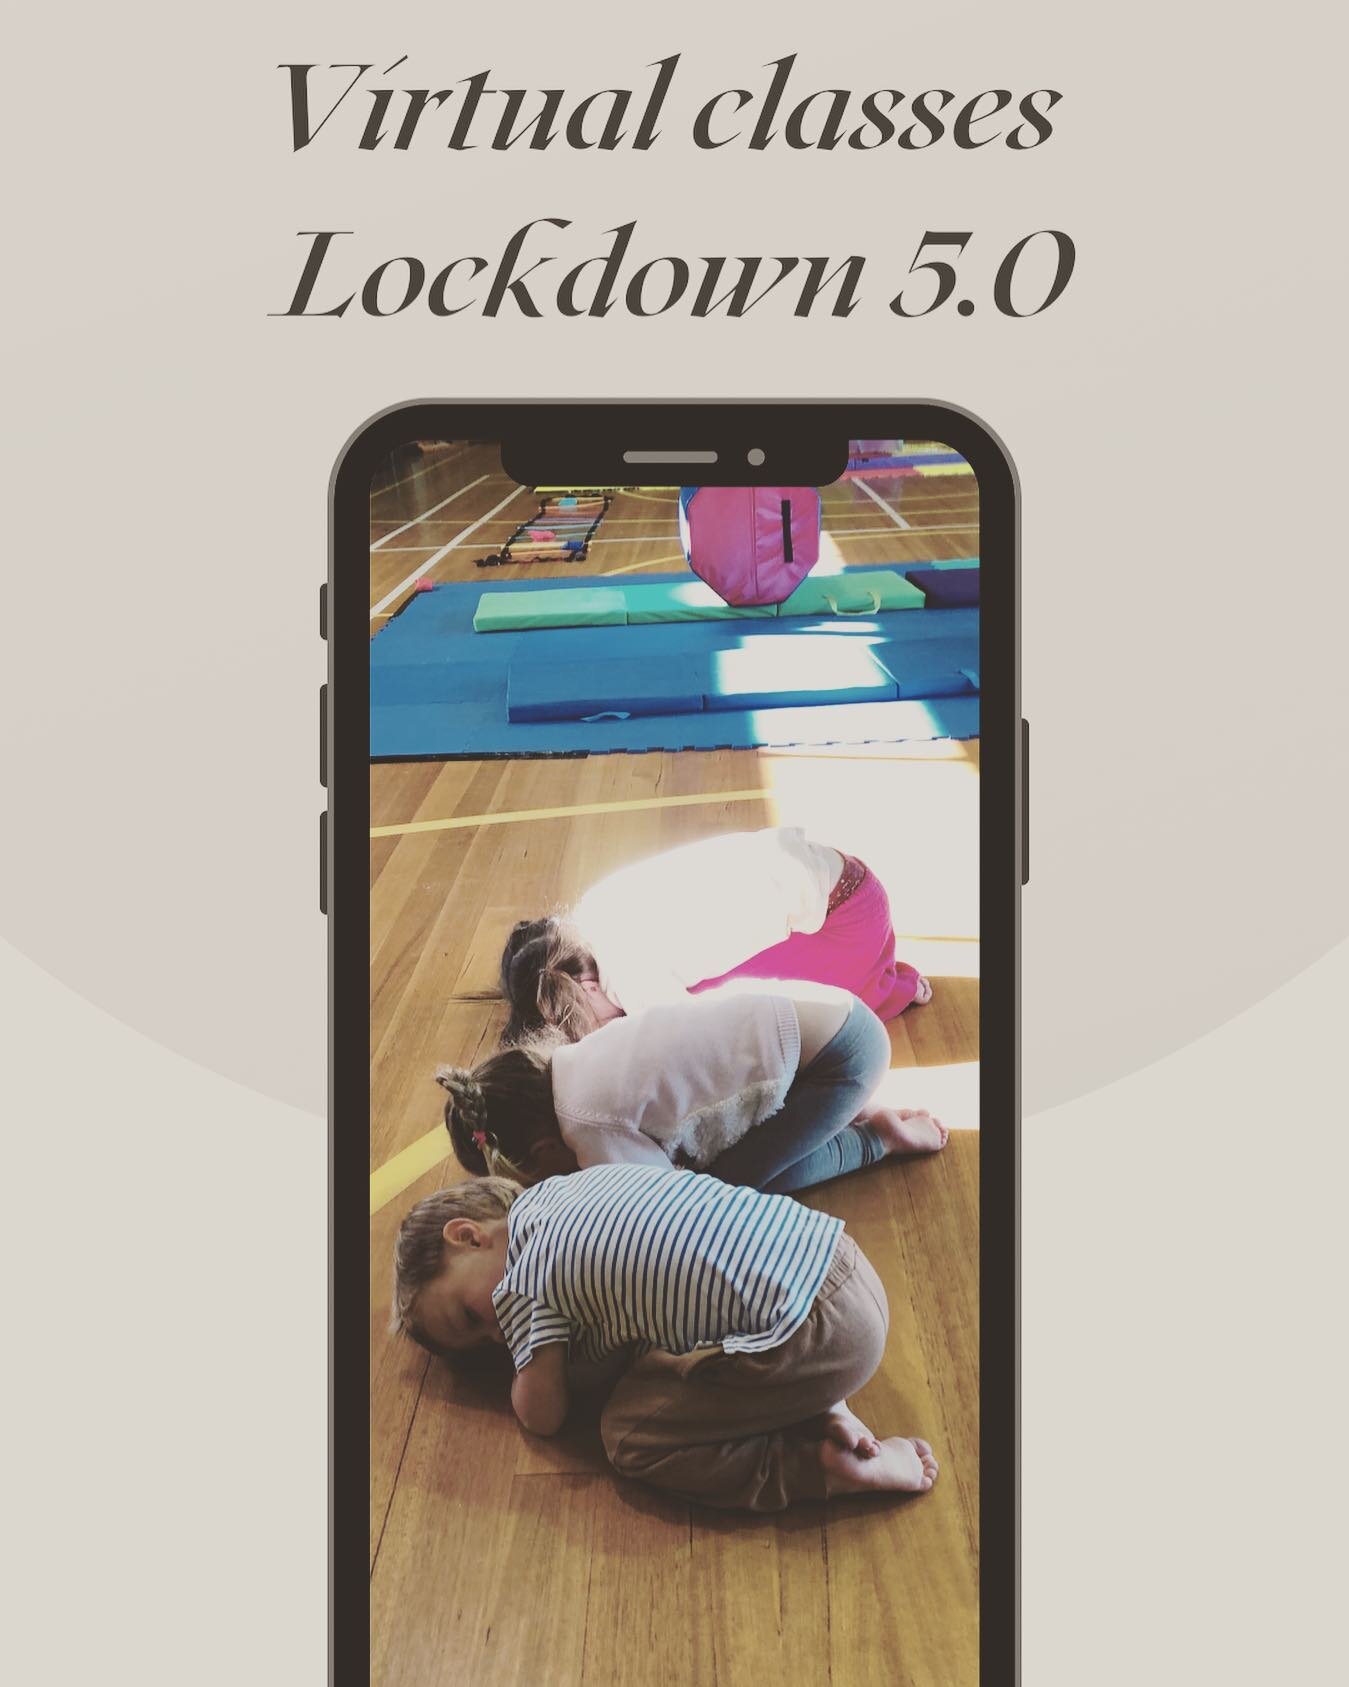 With the news that Lockdown 5.0 will be extended past the initial 5 days, I&rsquo;m considering running virtual classes. These classes can be purchased and watched anytime! (Not zoom meetings or online classes with times)
Who&rsquo;s keen?! Should I 